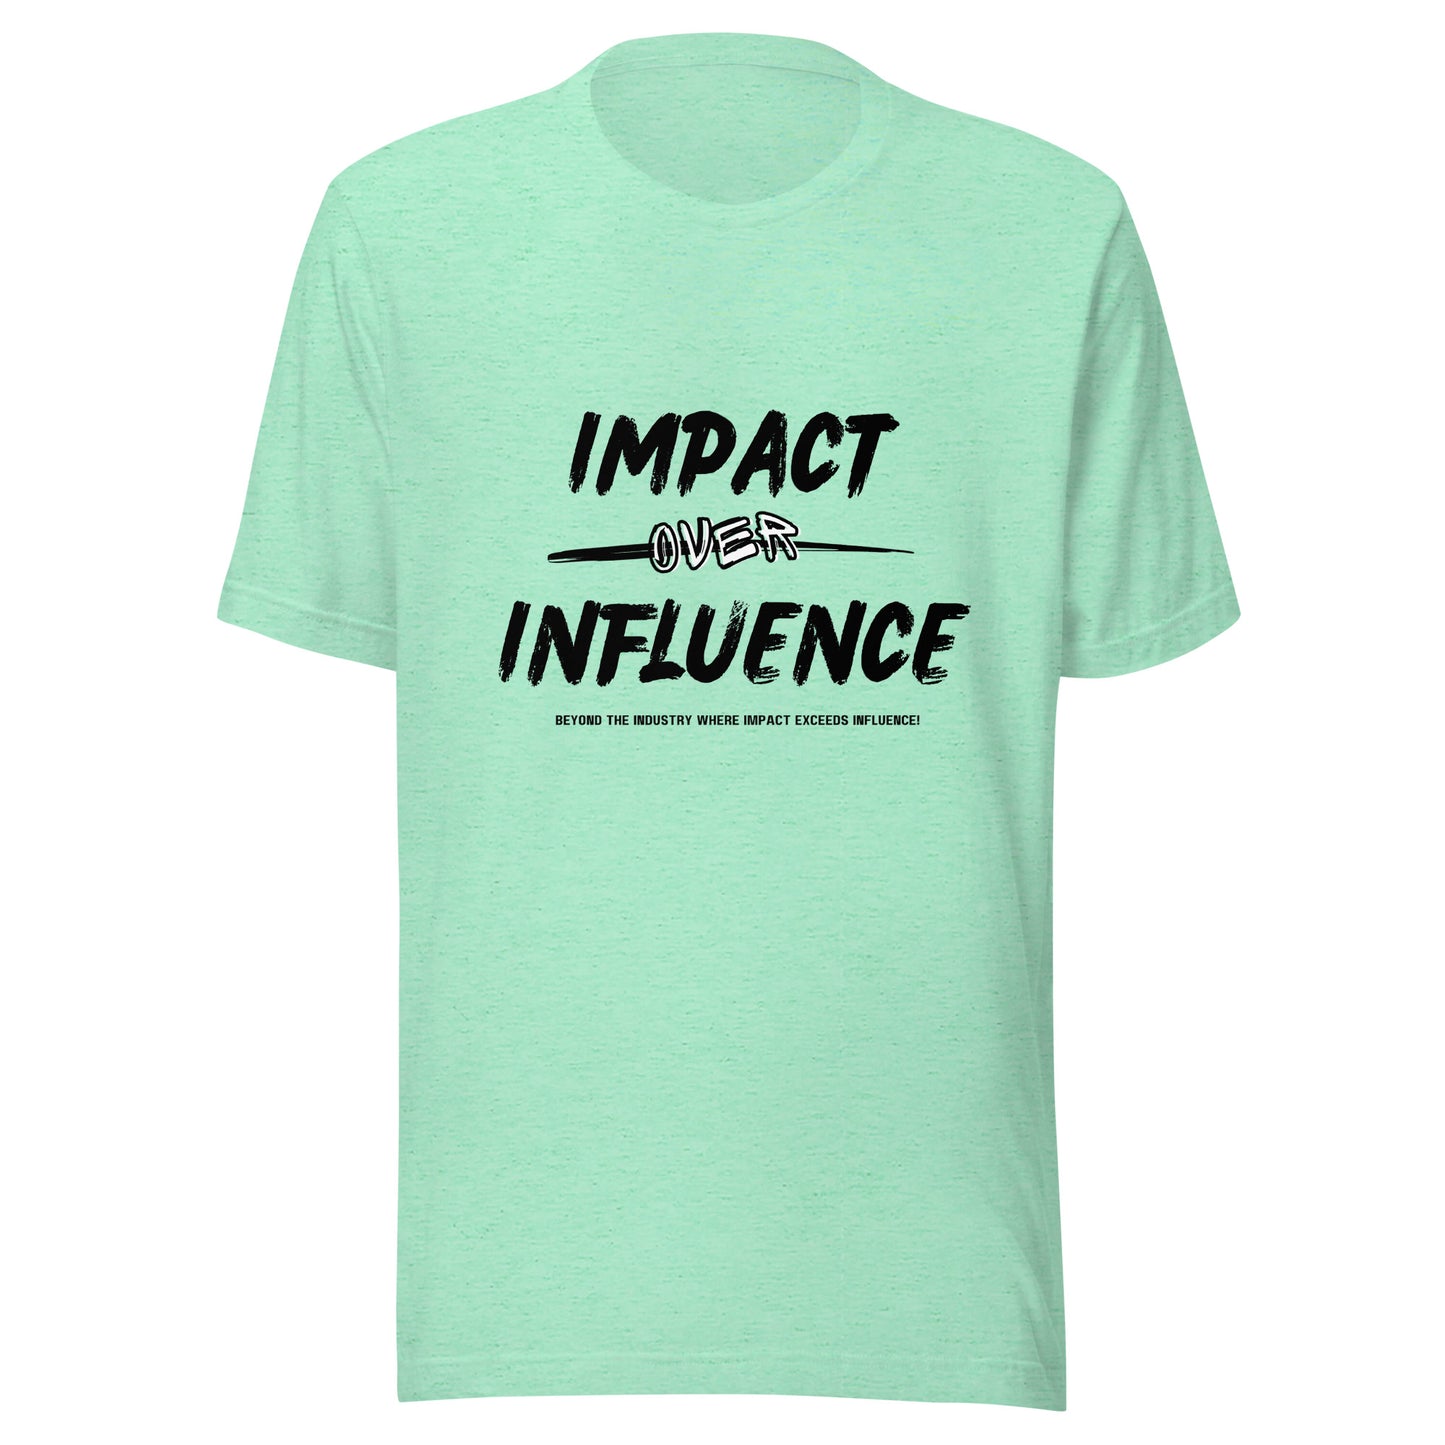 IMPACT OVER INFLUENCE (WHITE/LIGHT COLORS)